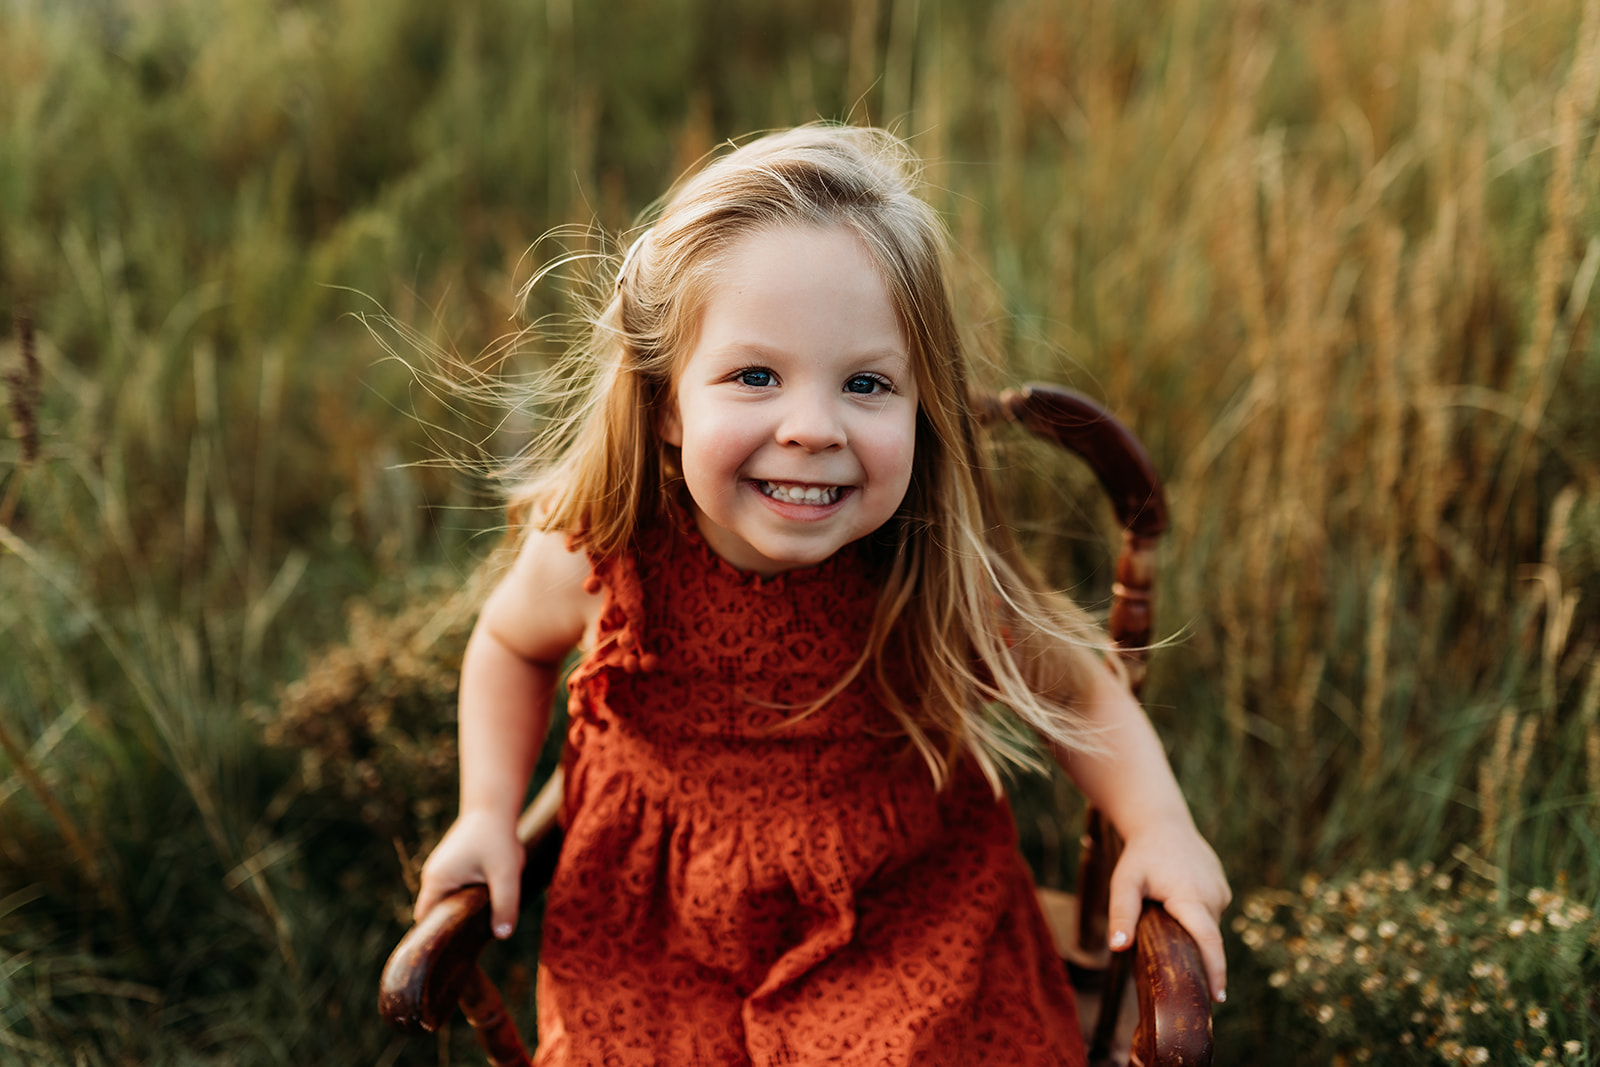 Photographer from Heather Ann Photography captures adorable girls' smile